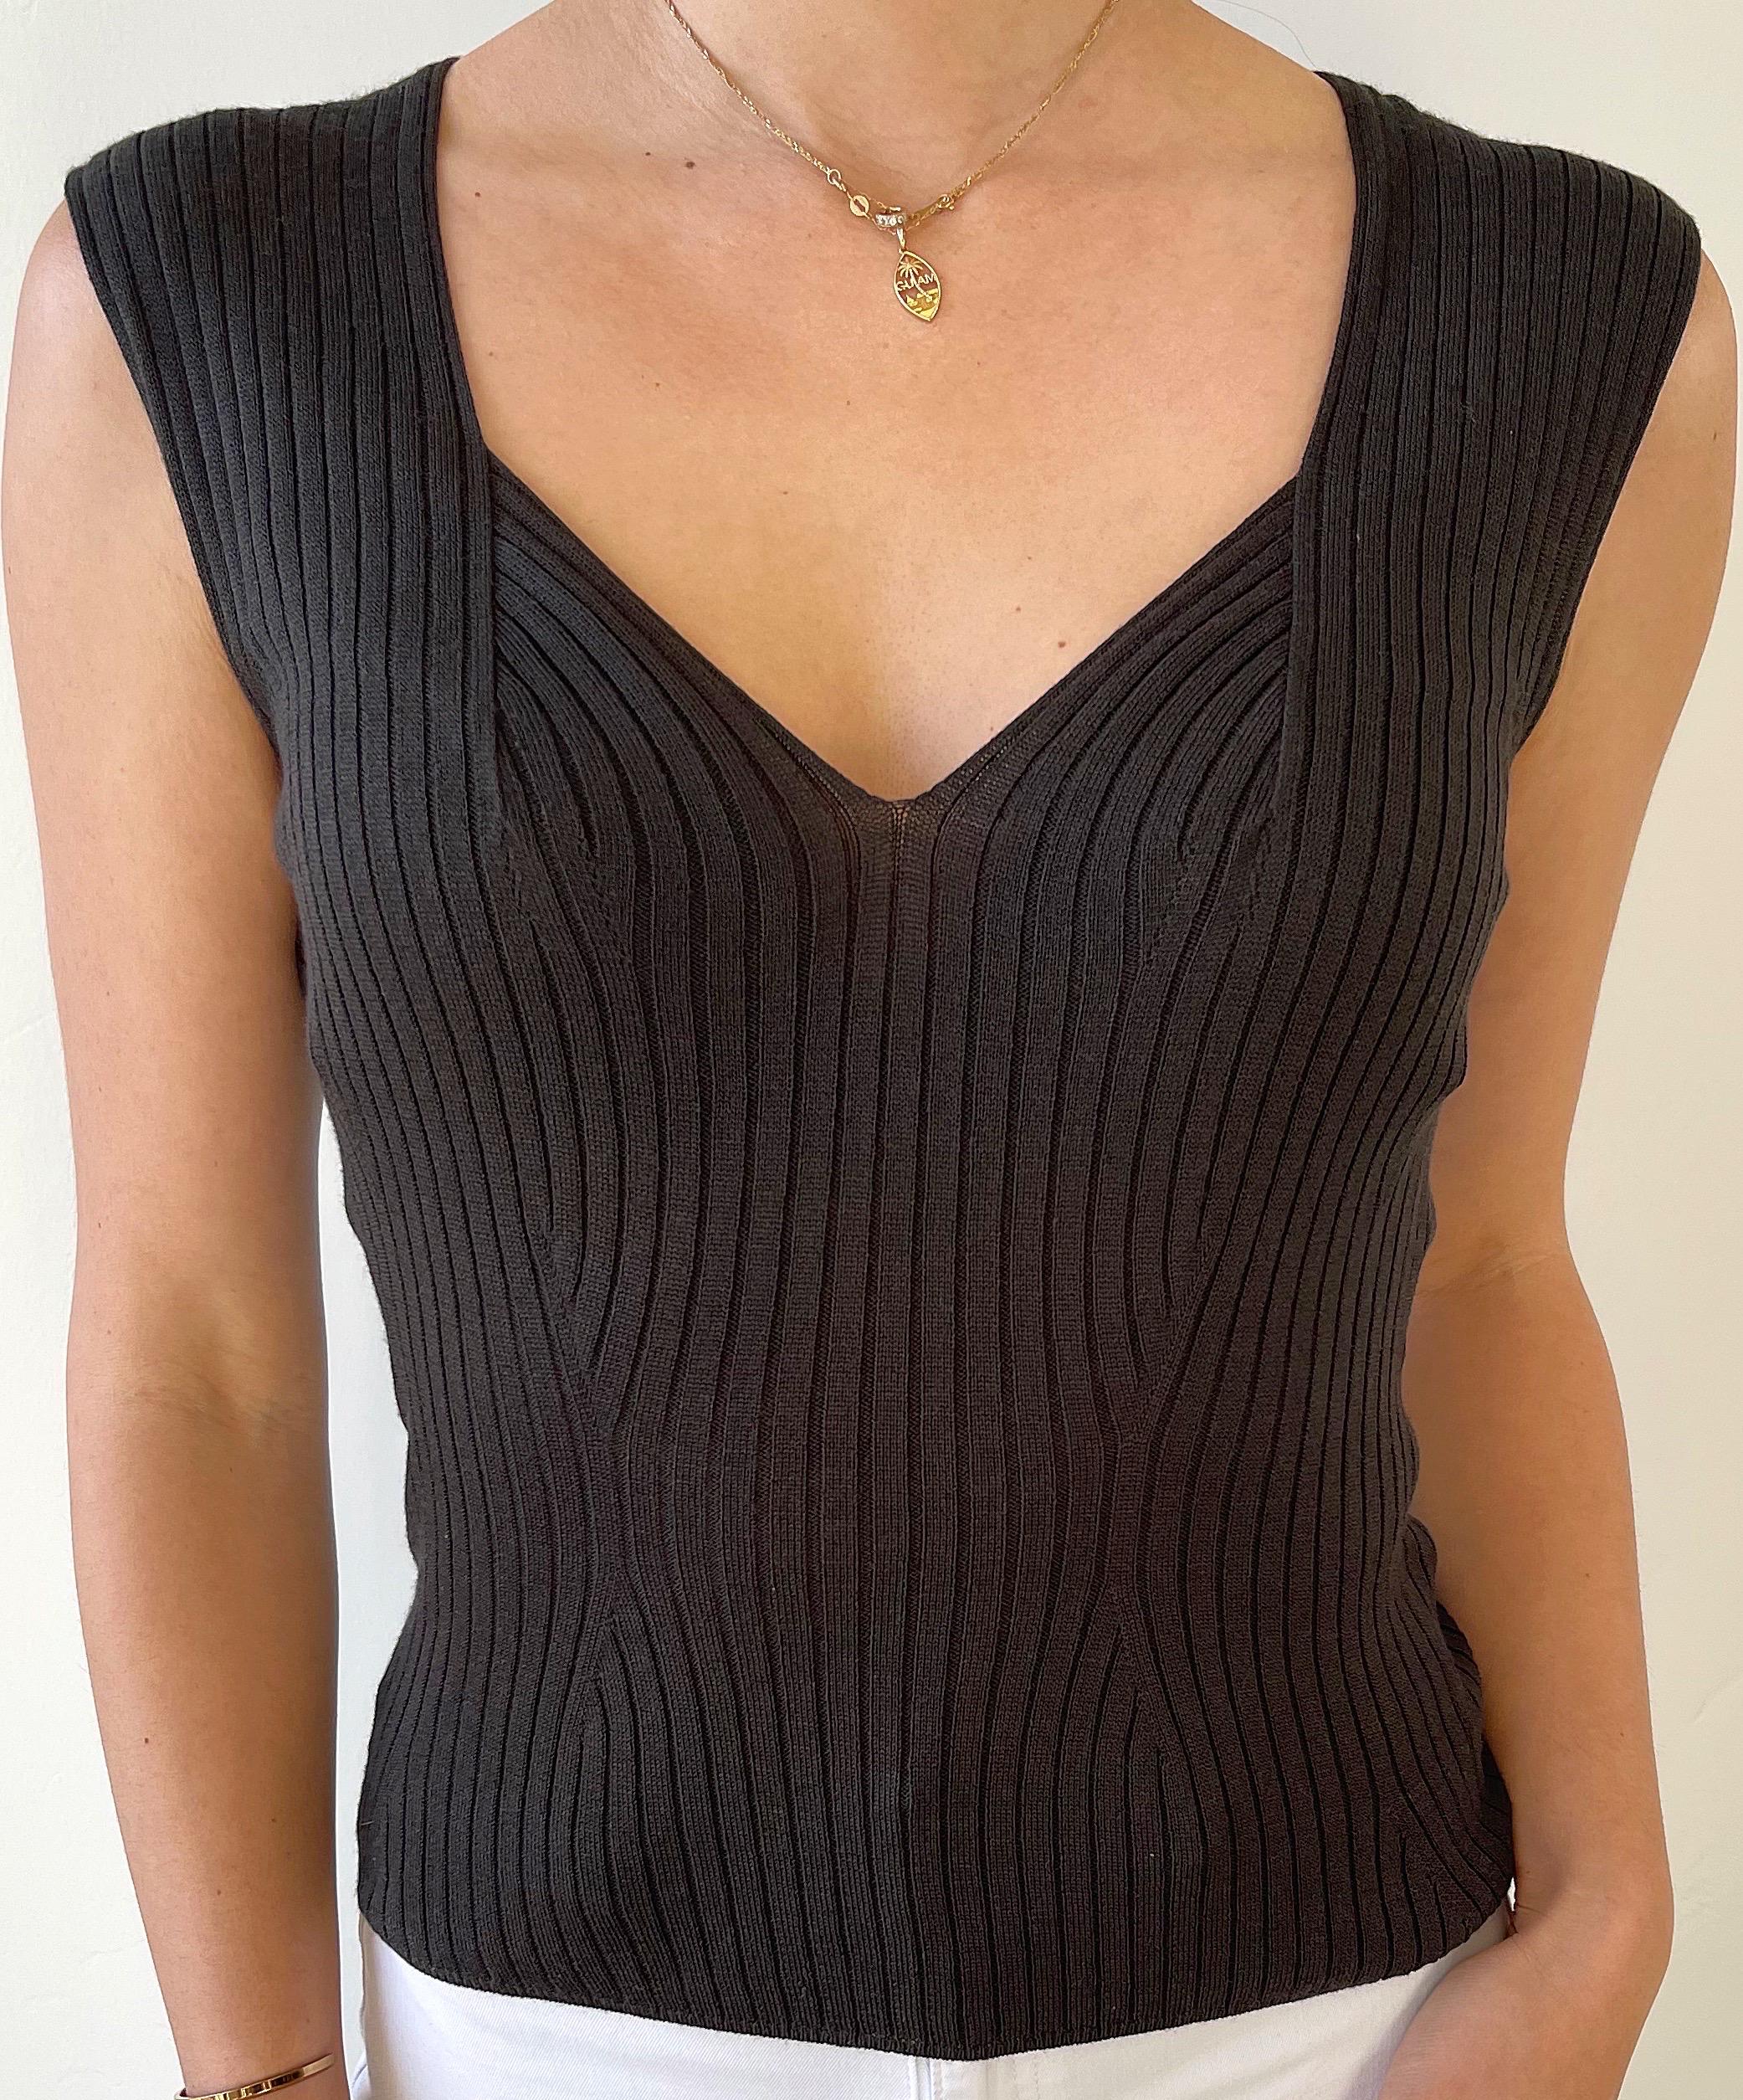 Yves Saint Laurent by Tom Ford Spring 2003 Brown Ribbed Sleeveless Vintage Top For Sale 8